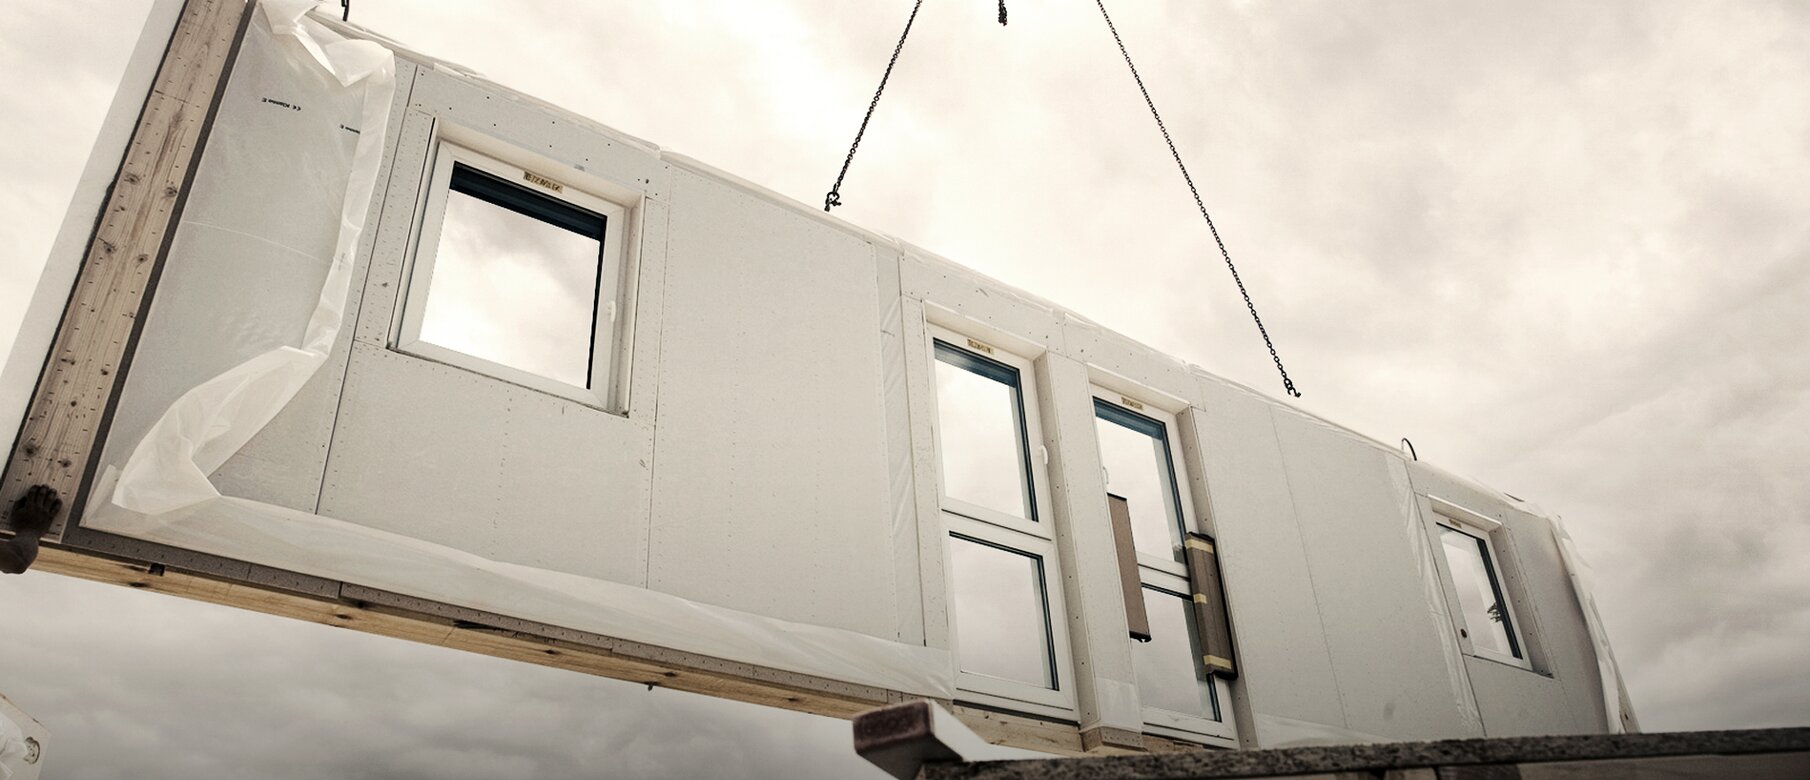 Beck branches prefabricated housing